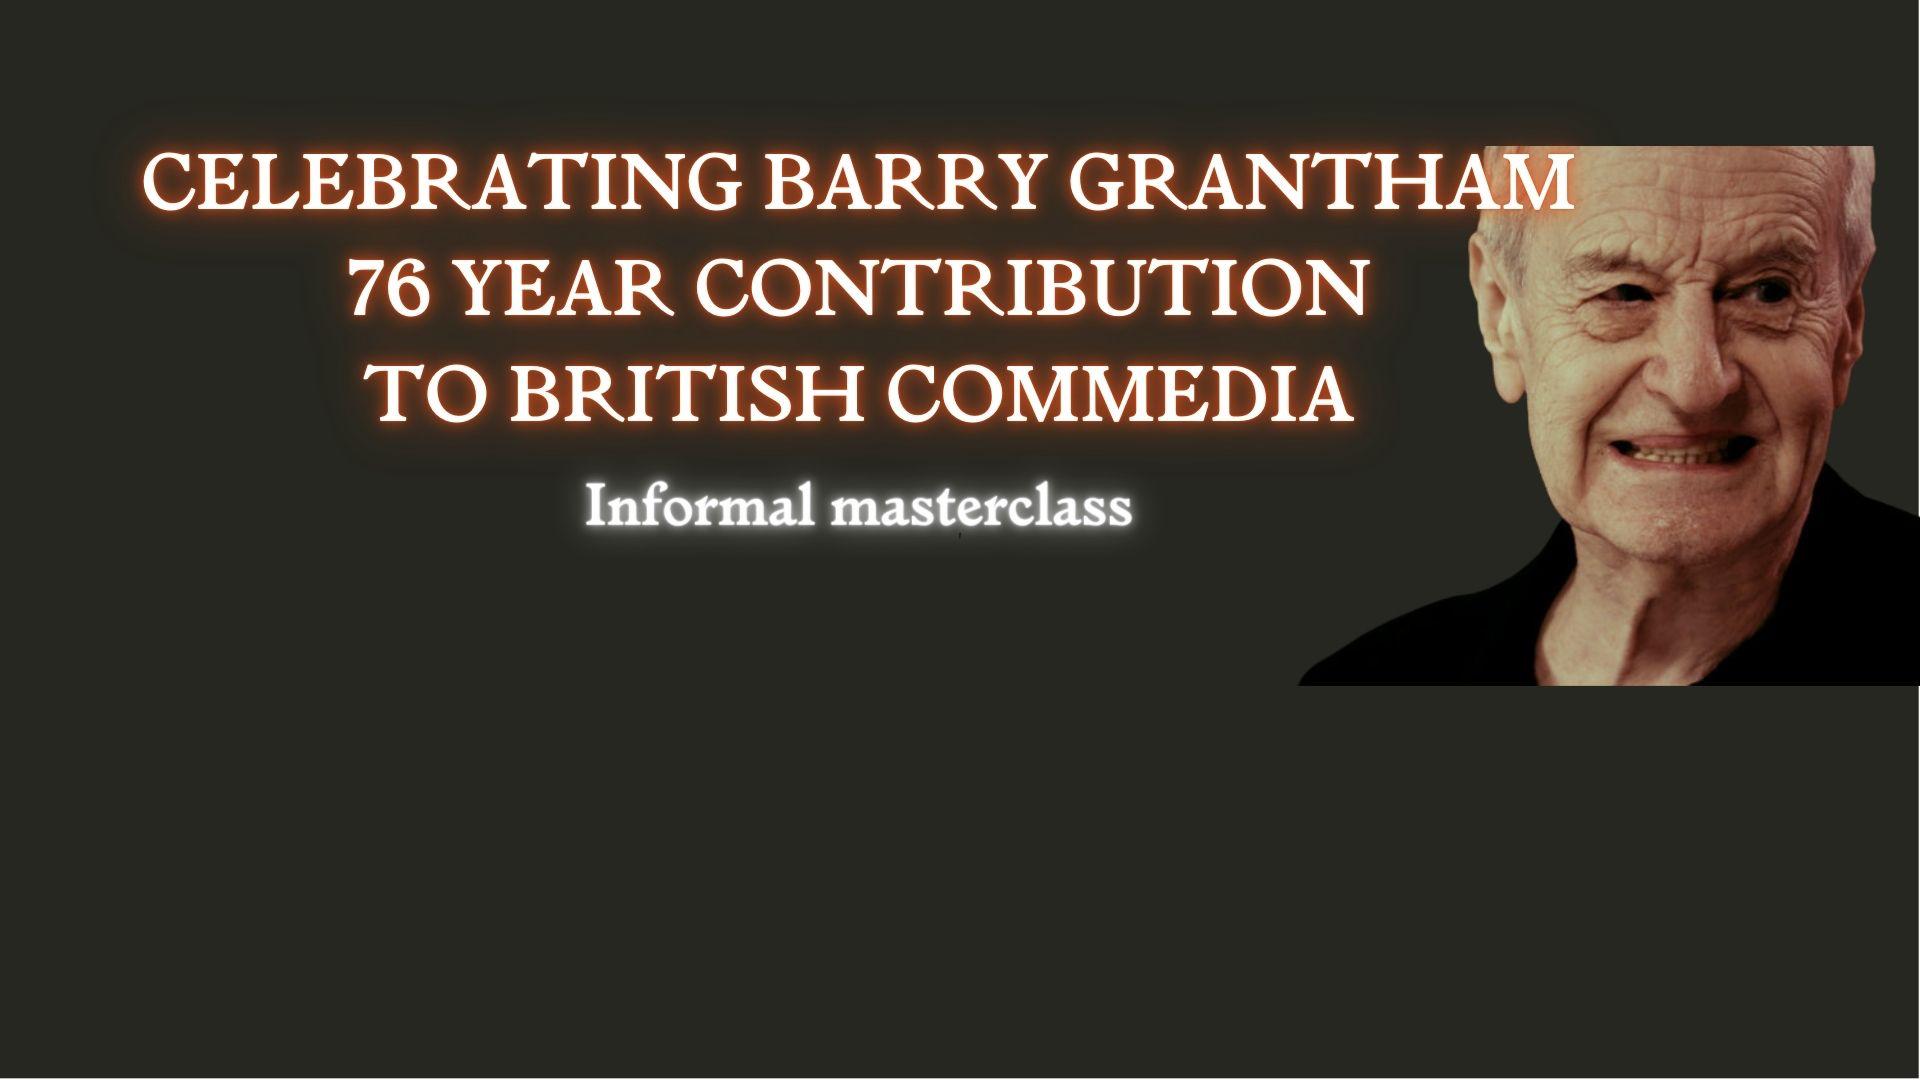 CELEBRATION OF BARRY GRANTHAM's 76 YEAR CONTRIBUTION TO BRITISH COMMEDIA (first call) ~ Live Broadcast